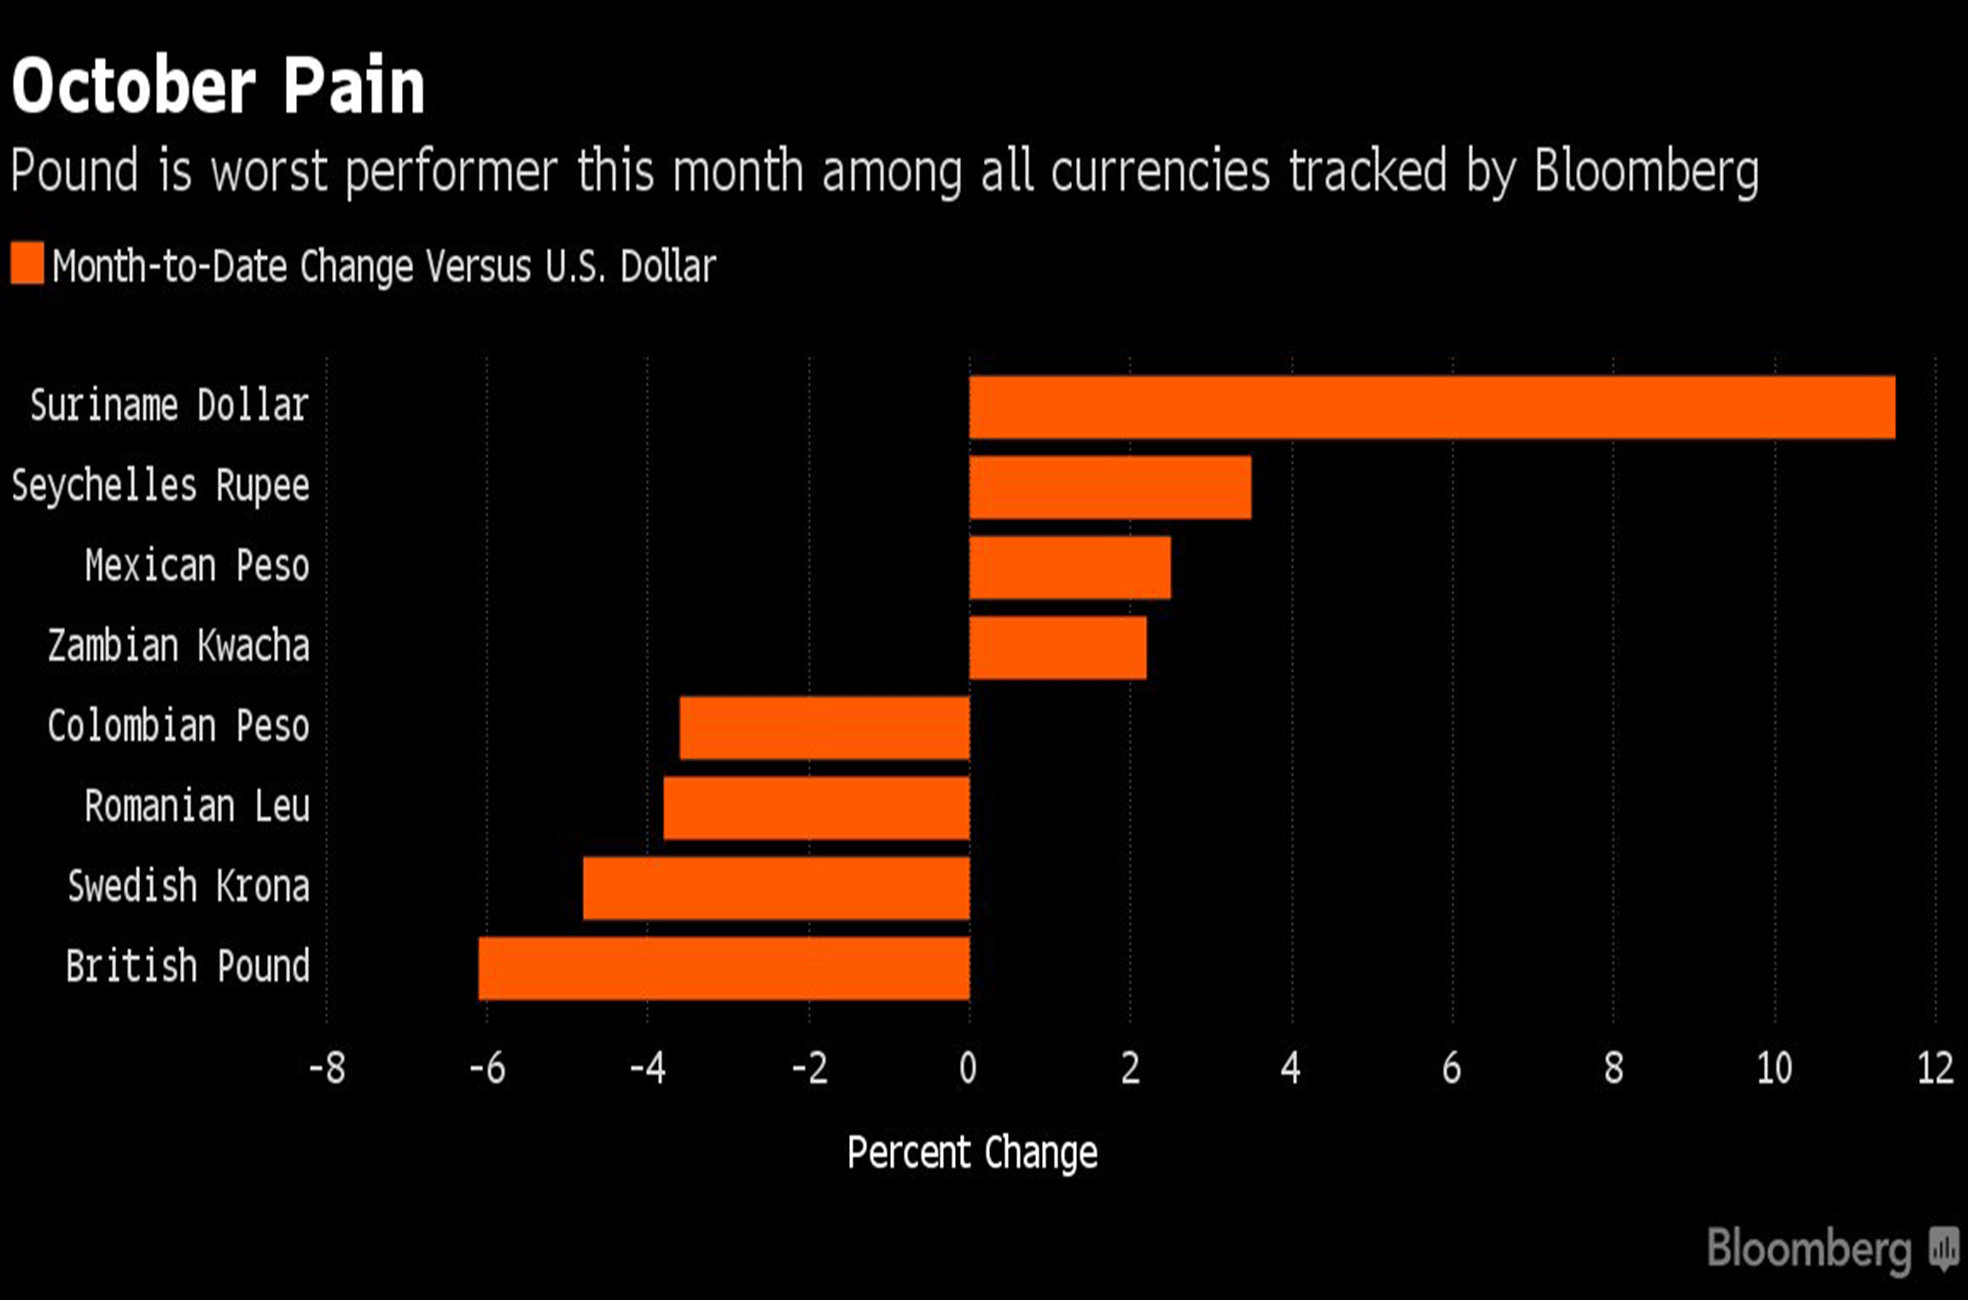 The pound is the worst performing currency in the world against the dollar